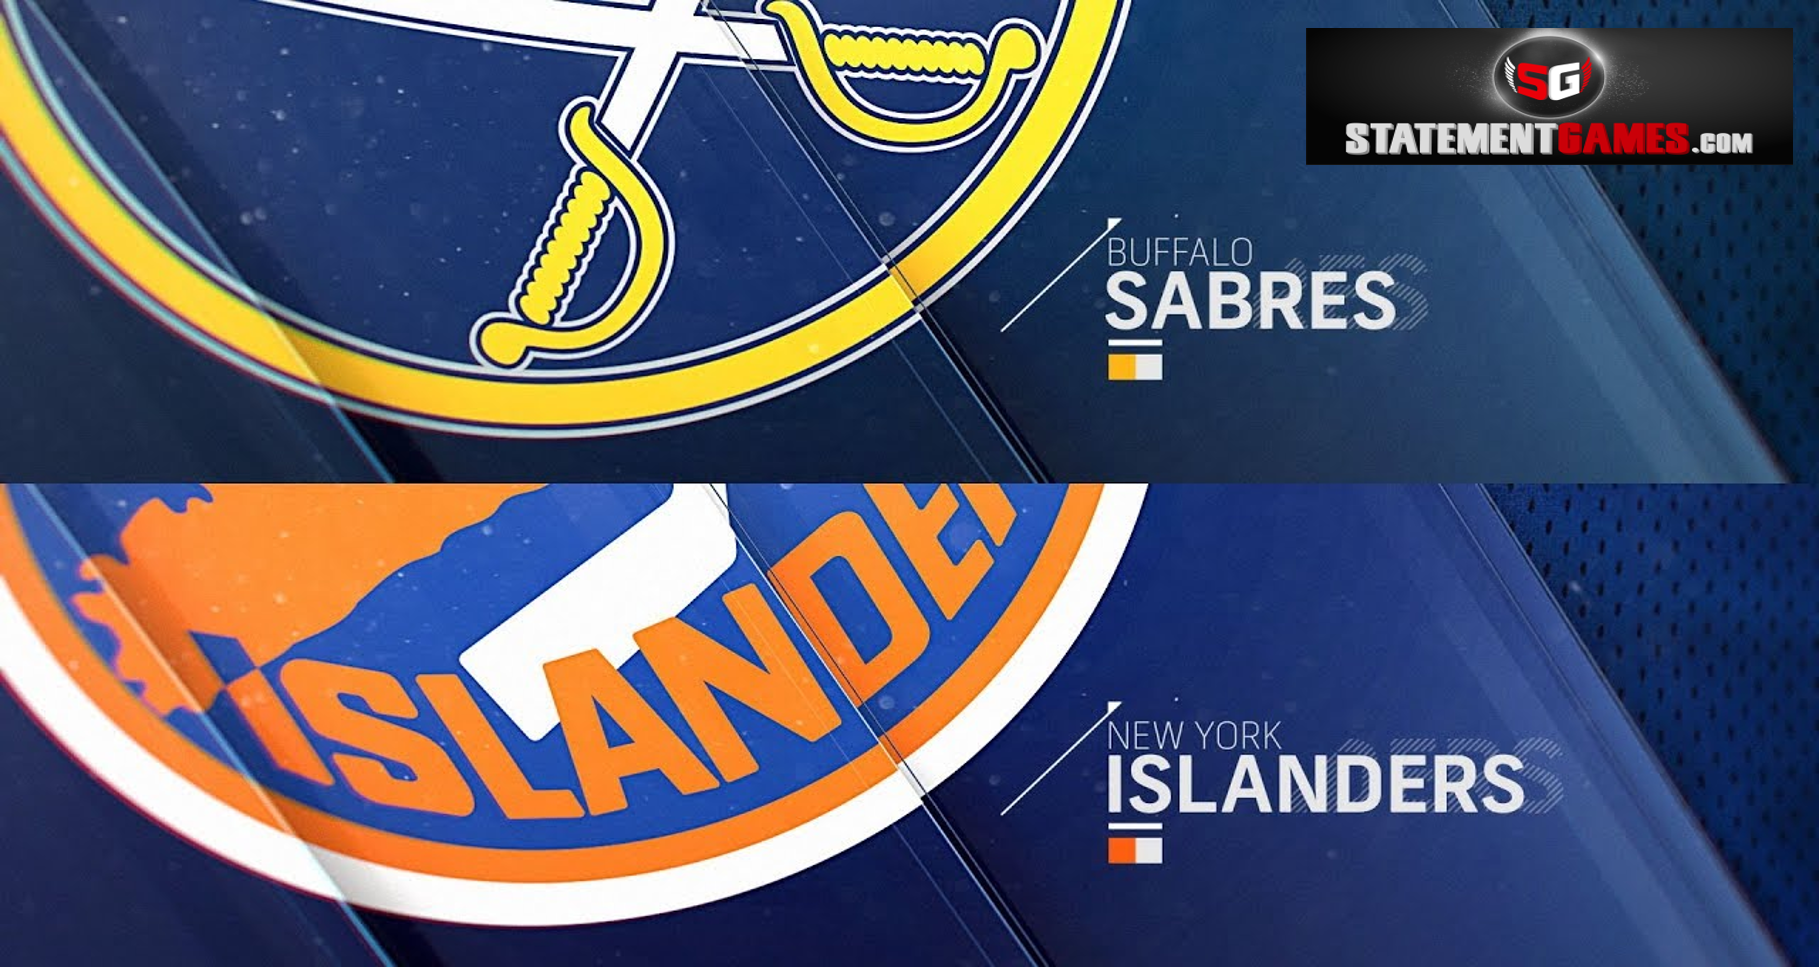 Buffalo Sabres Vs New York Islanders – NHL Game Day Preview: 02.02.2021